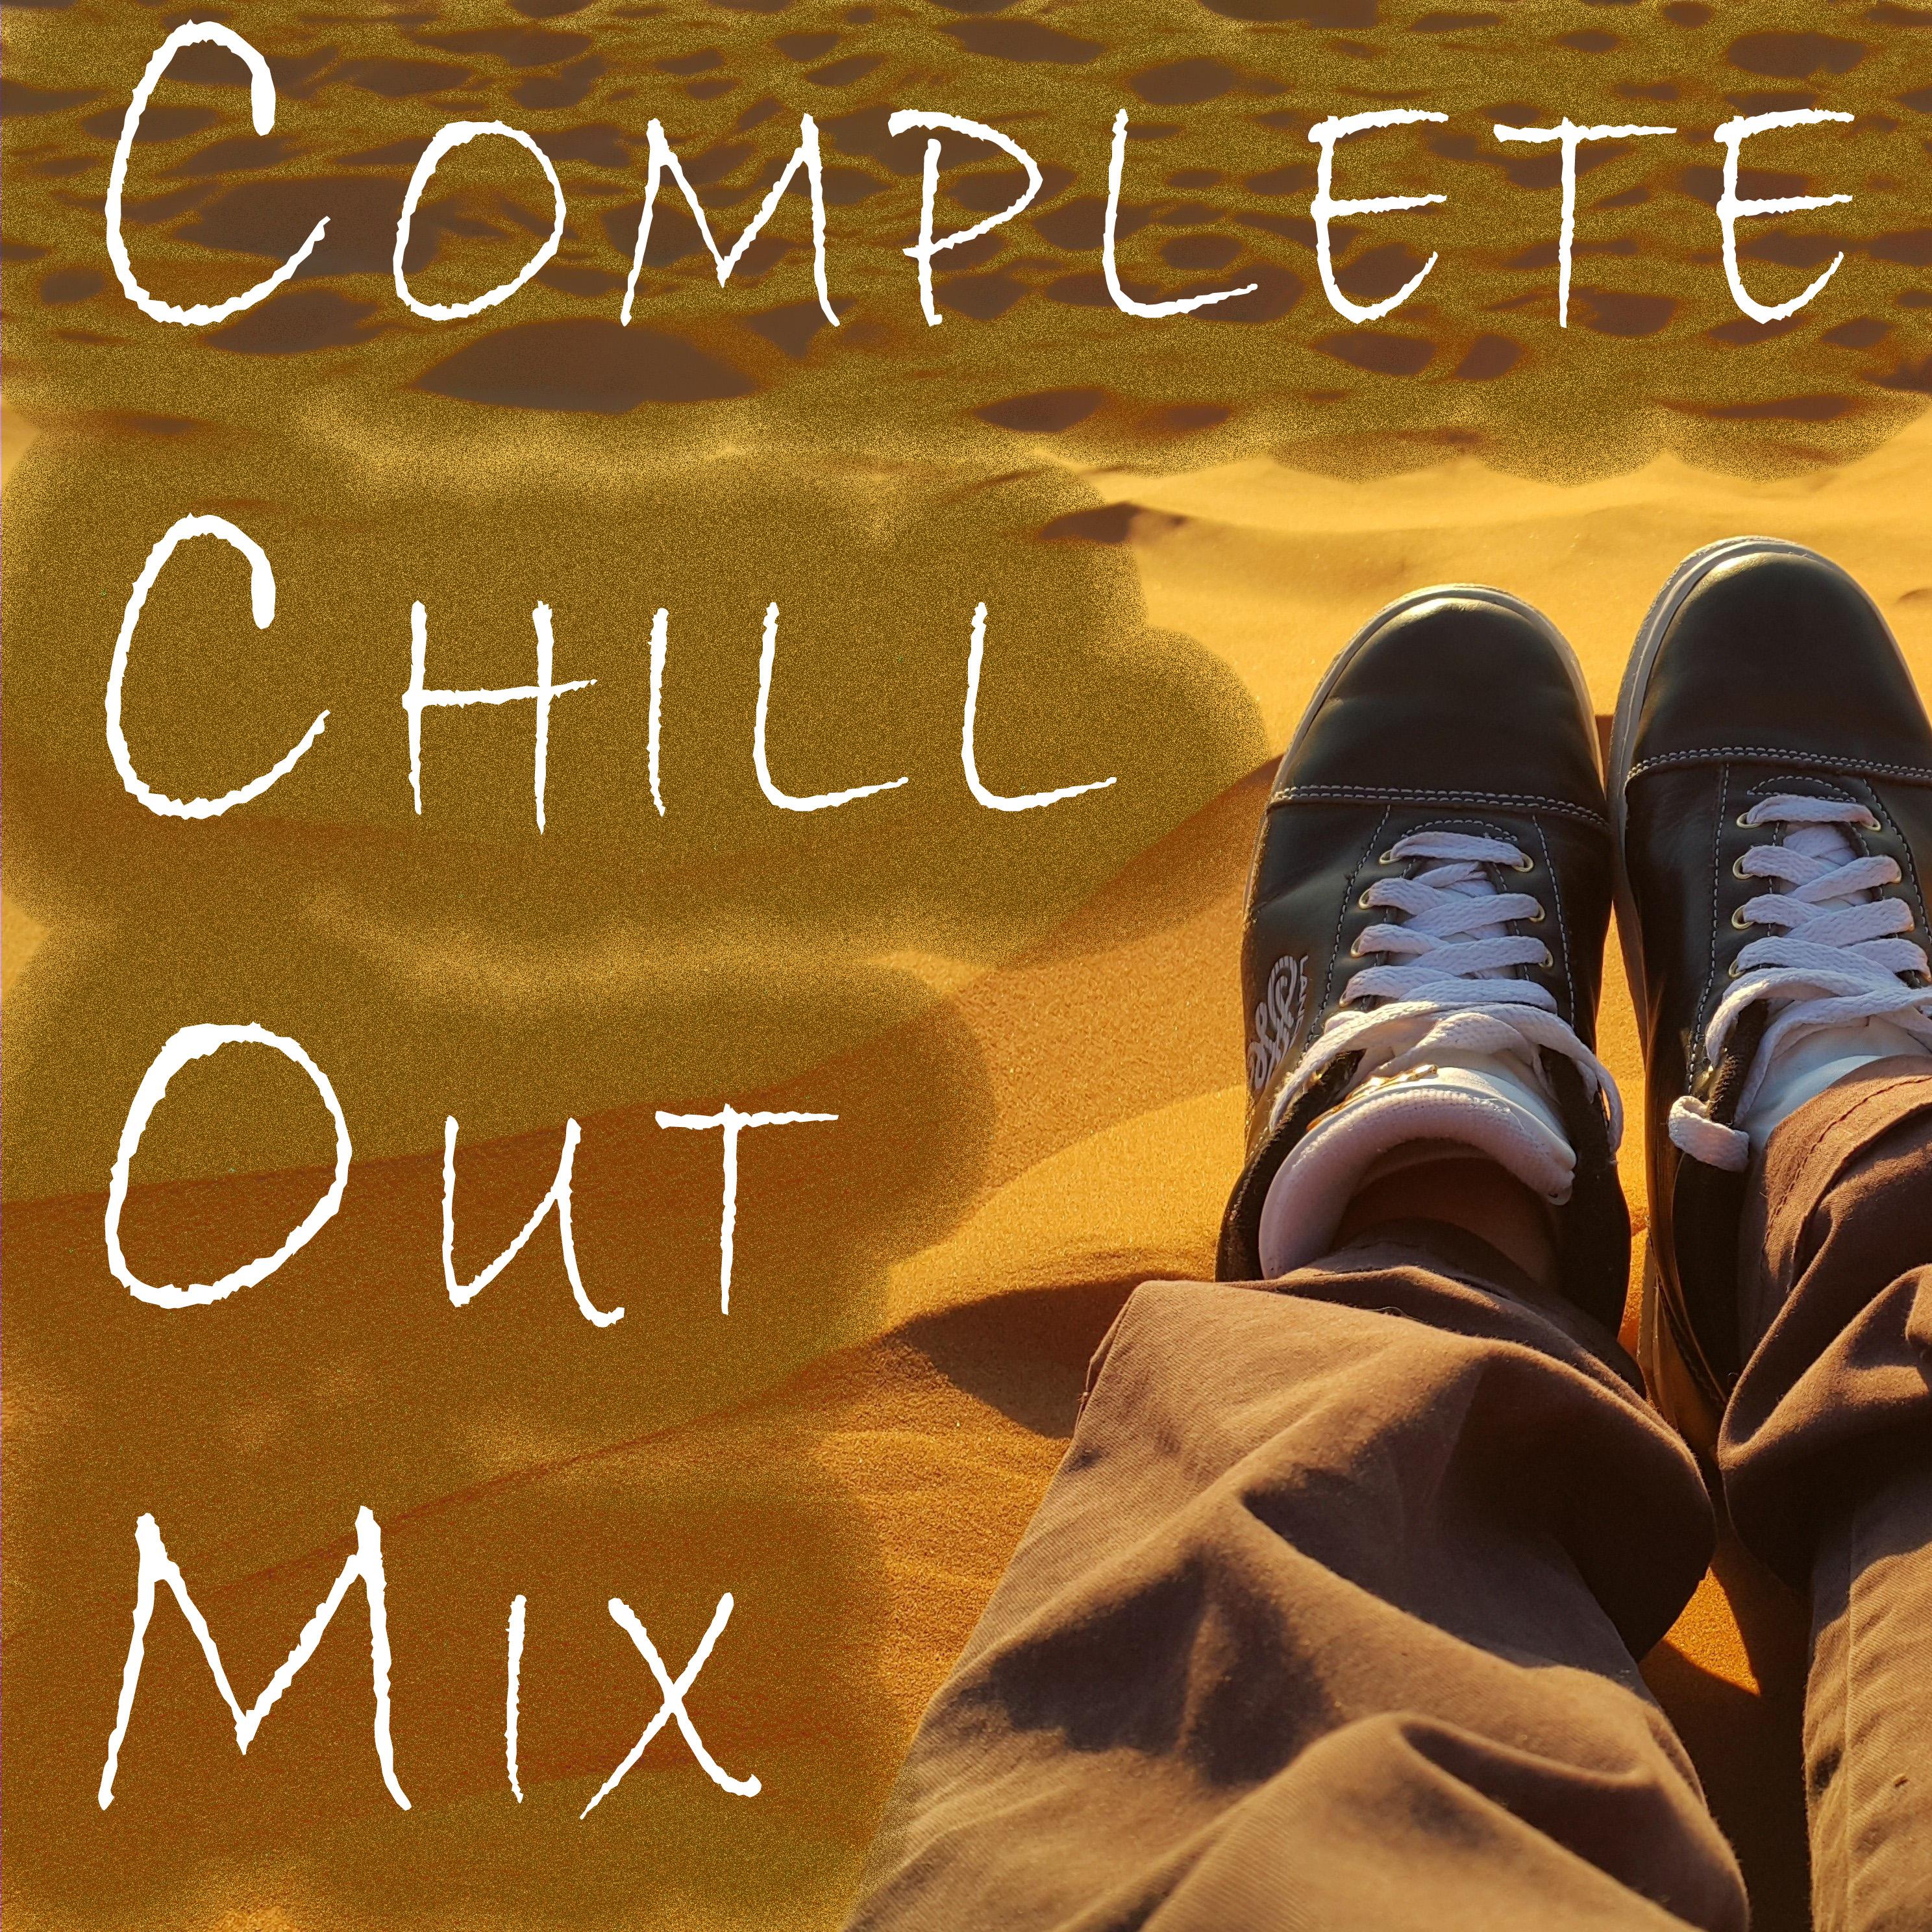 Complete Chill Out Mix  - Ultimate Good Vibes for Total Relaxation, Stress-Free Ambience, Anxiety Relief, Study & Exam Focus, Spa & Yoga Sessions and Transcendental Meditation